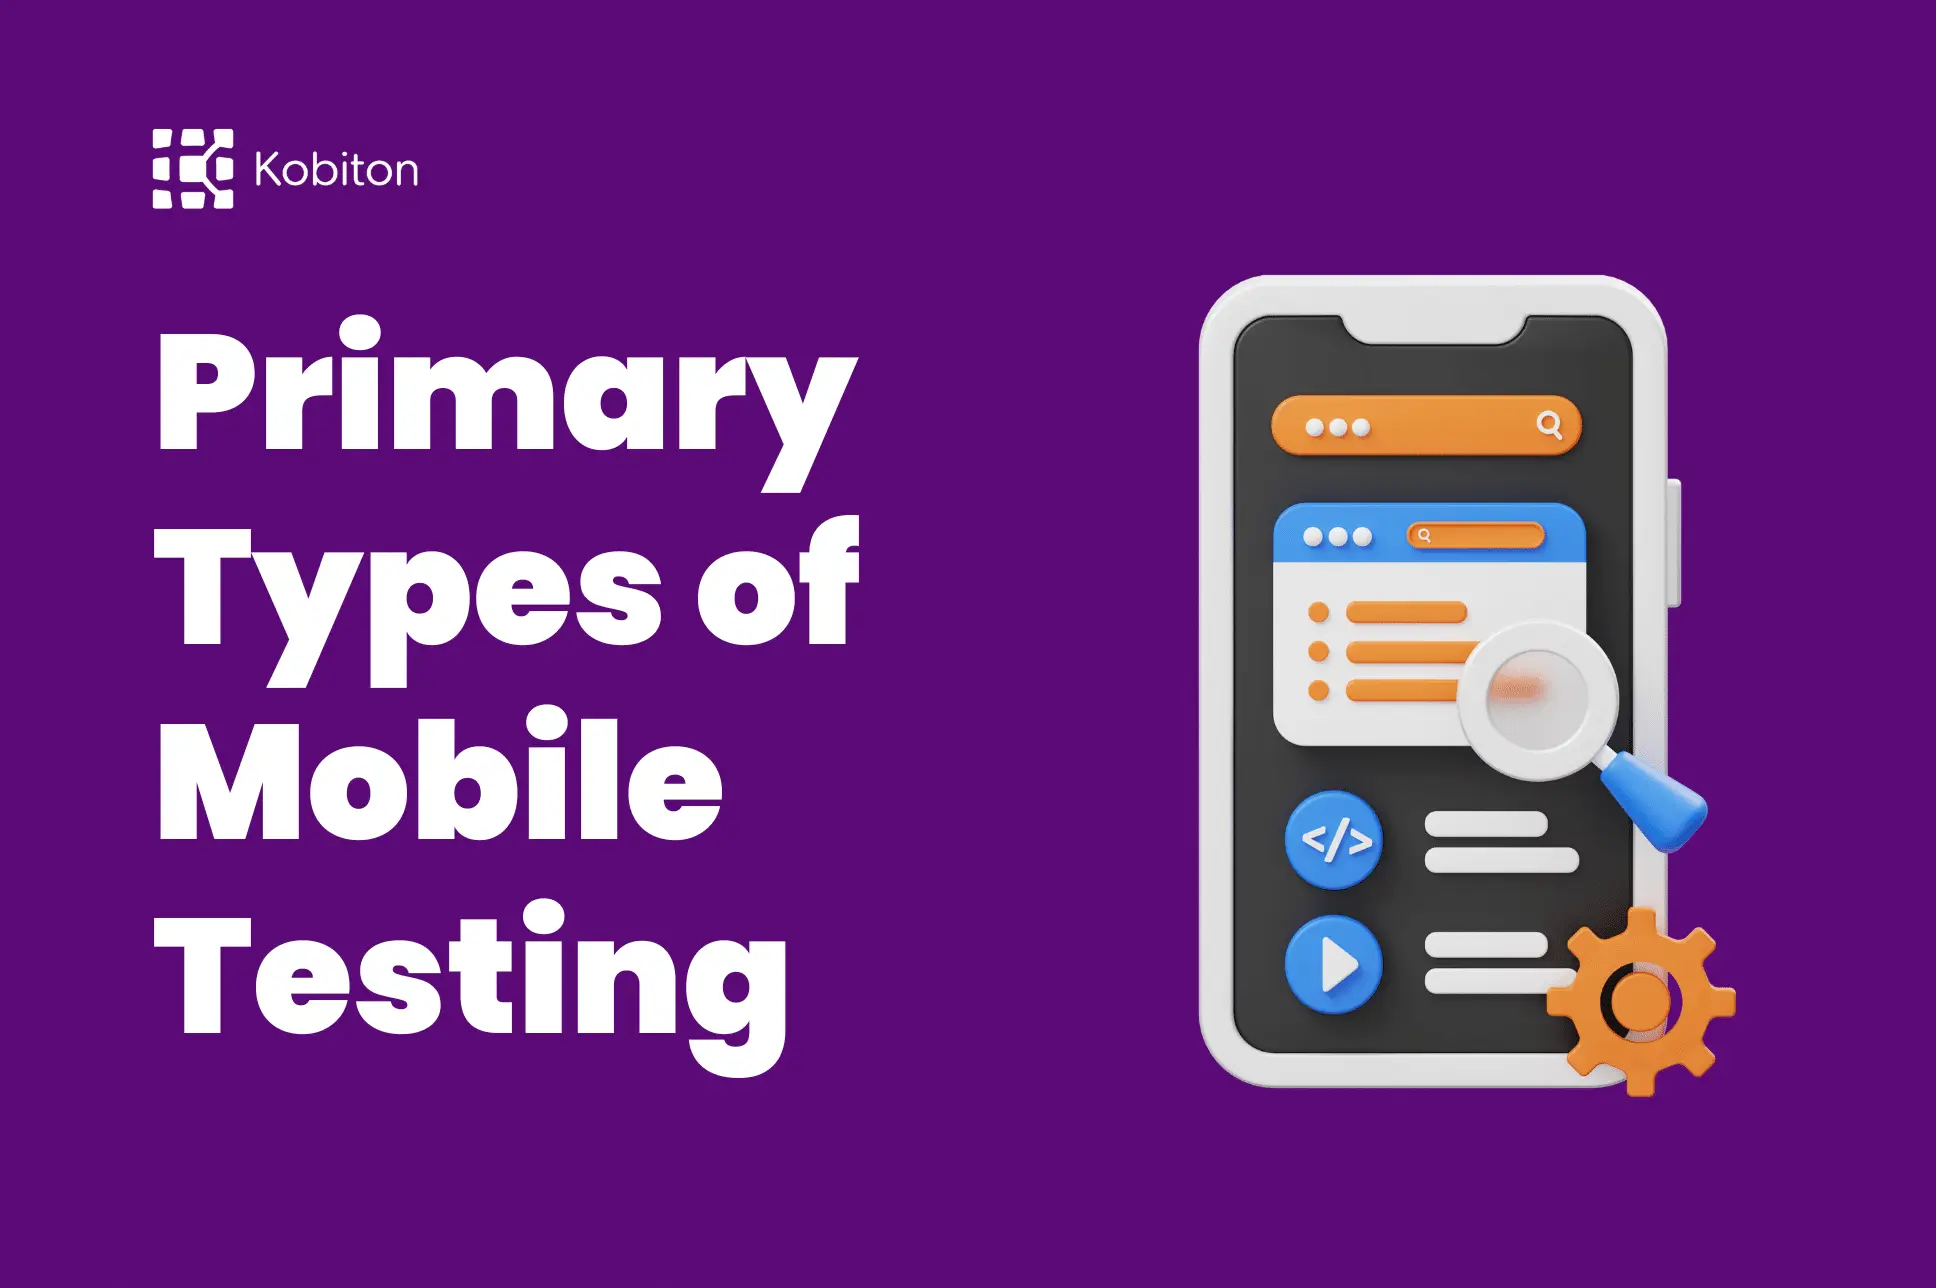 Illustration of a phone with the words "Primary Types of Mobile Testing"